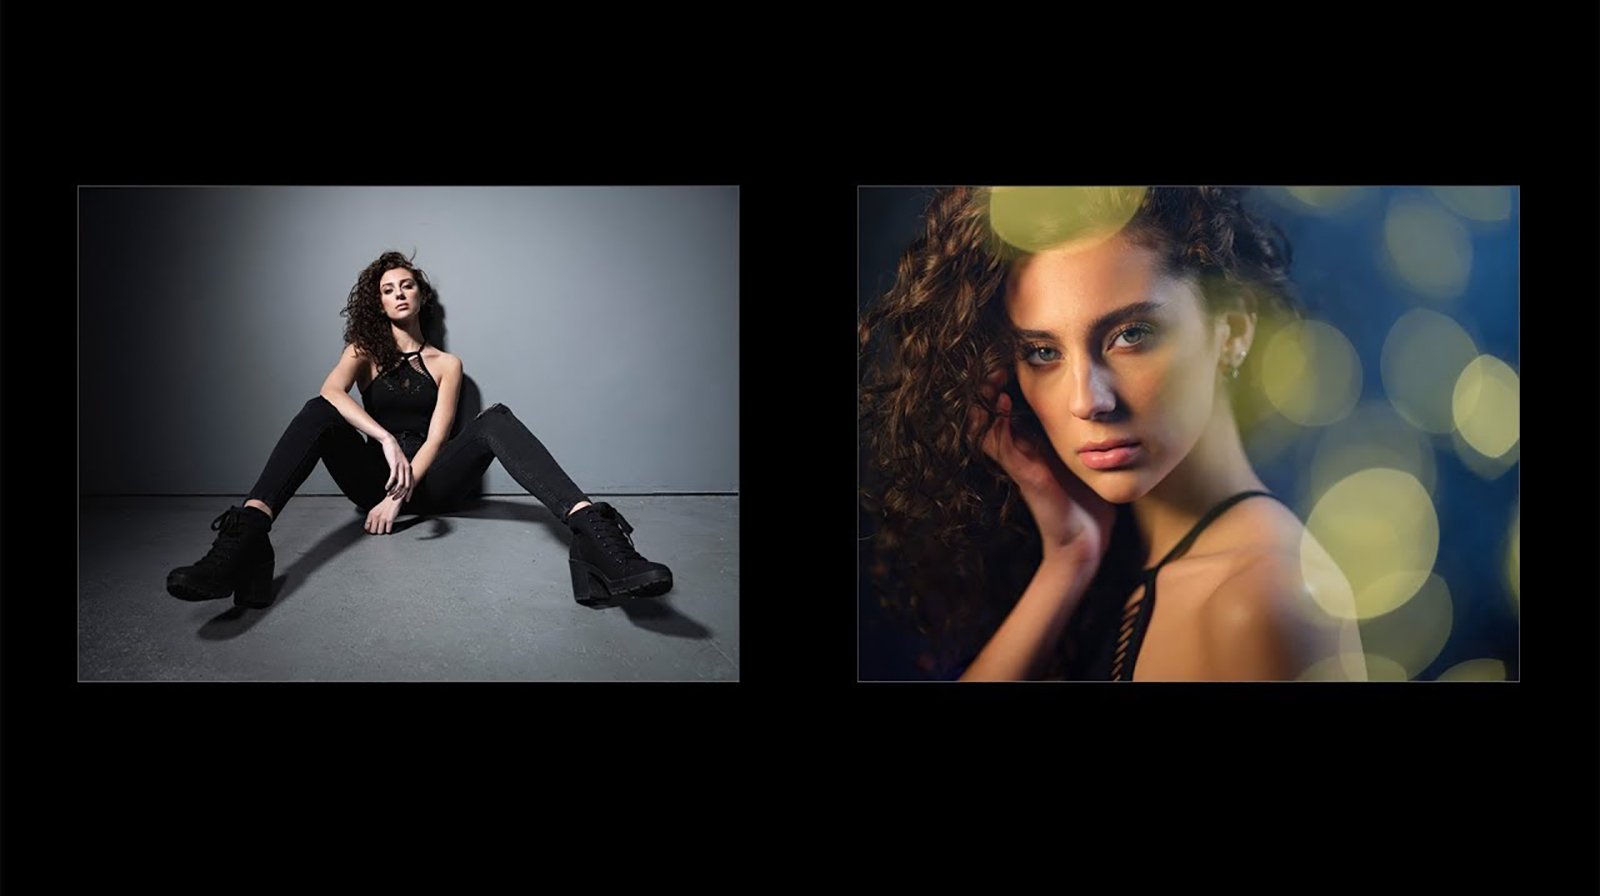 Photo Challenge: Capturing Creative Portraits Using Only Continuous Lights